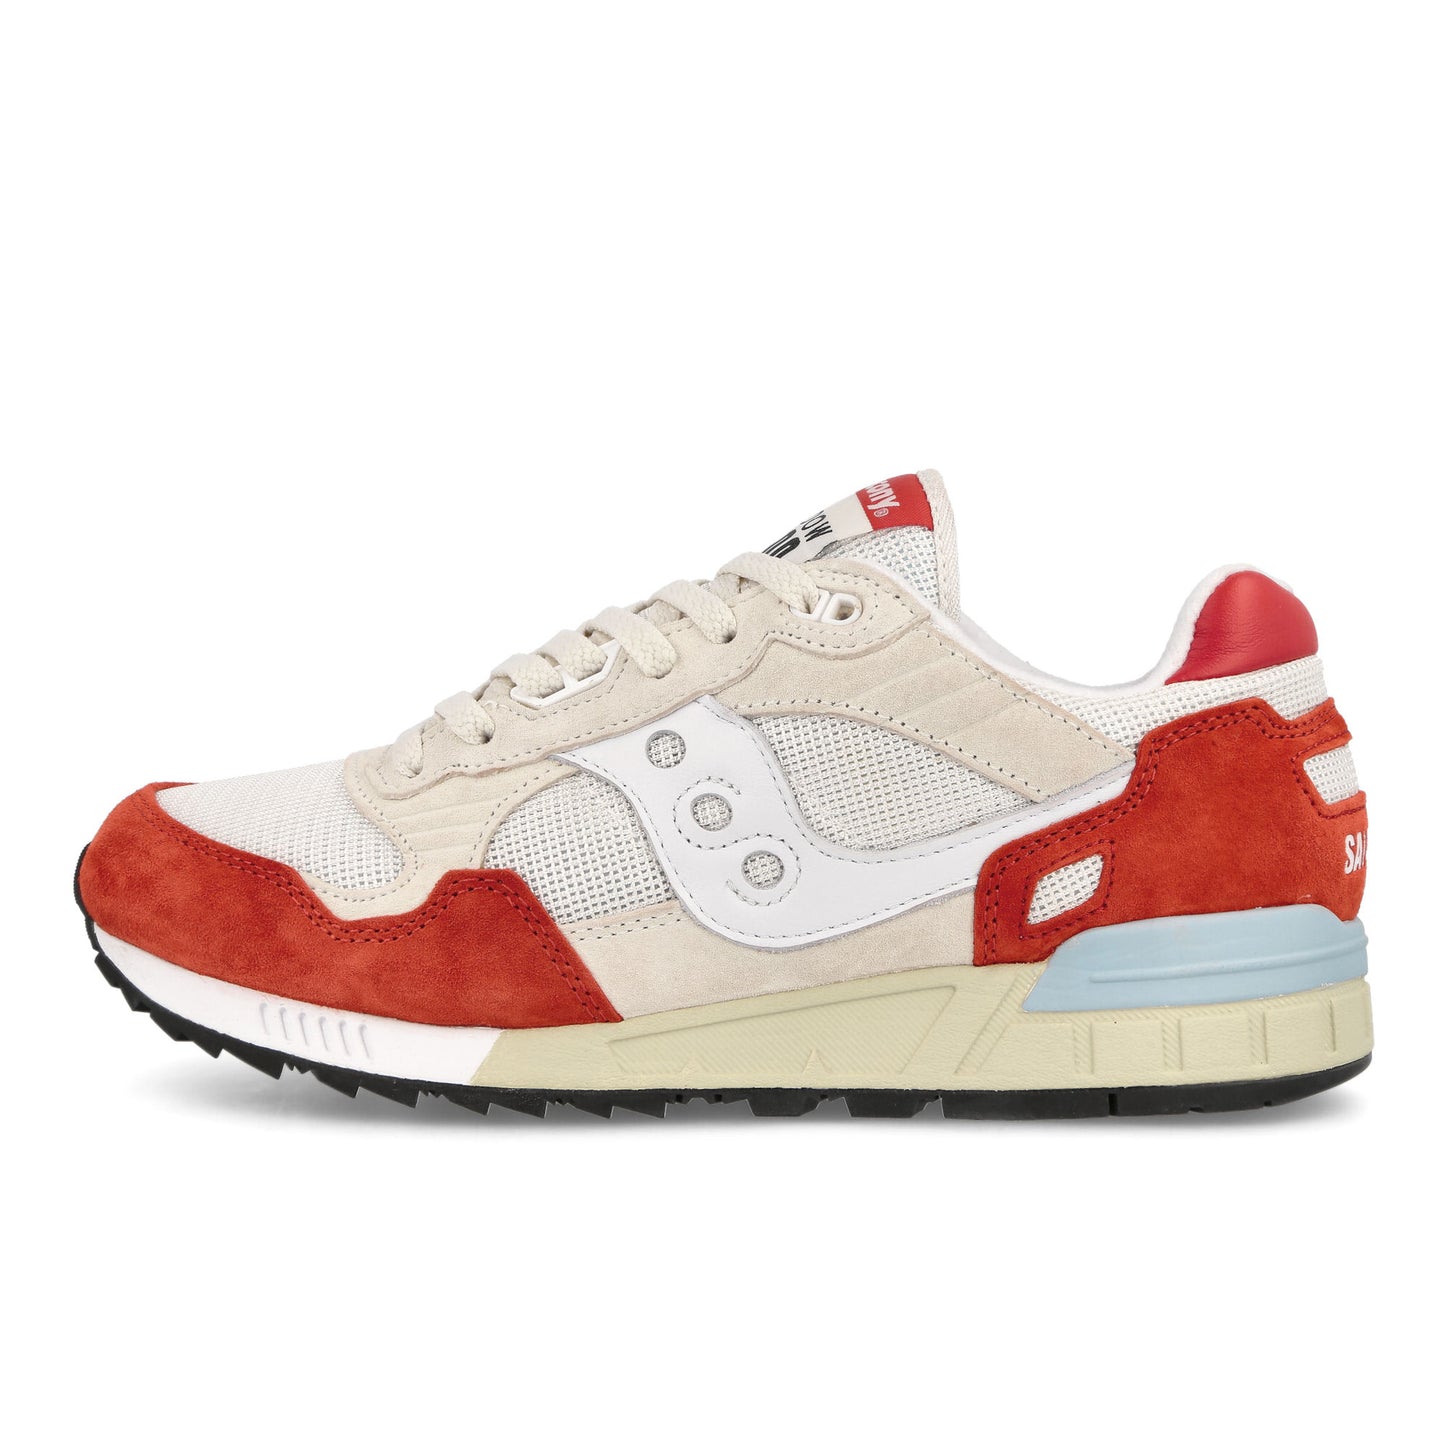 Saucony Shadow 5000 "White/Red"